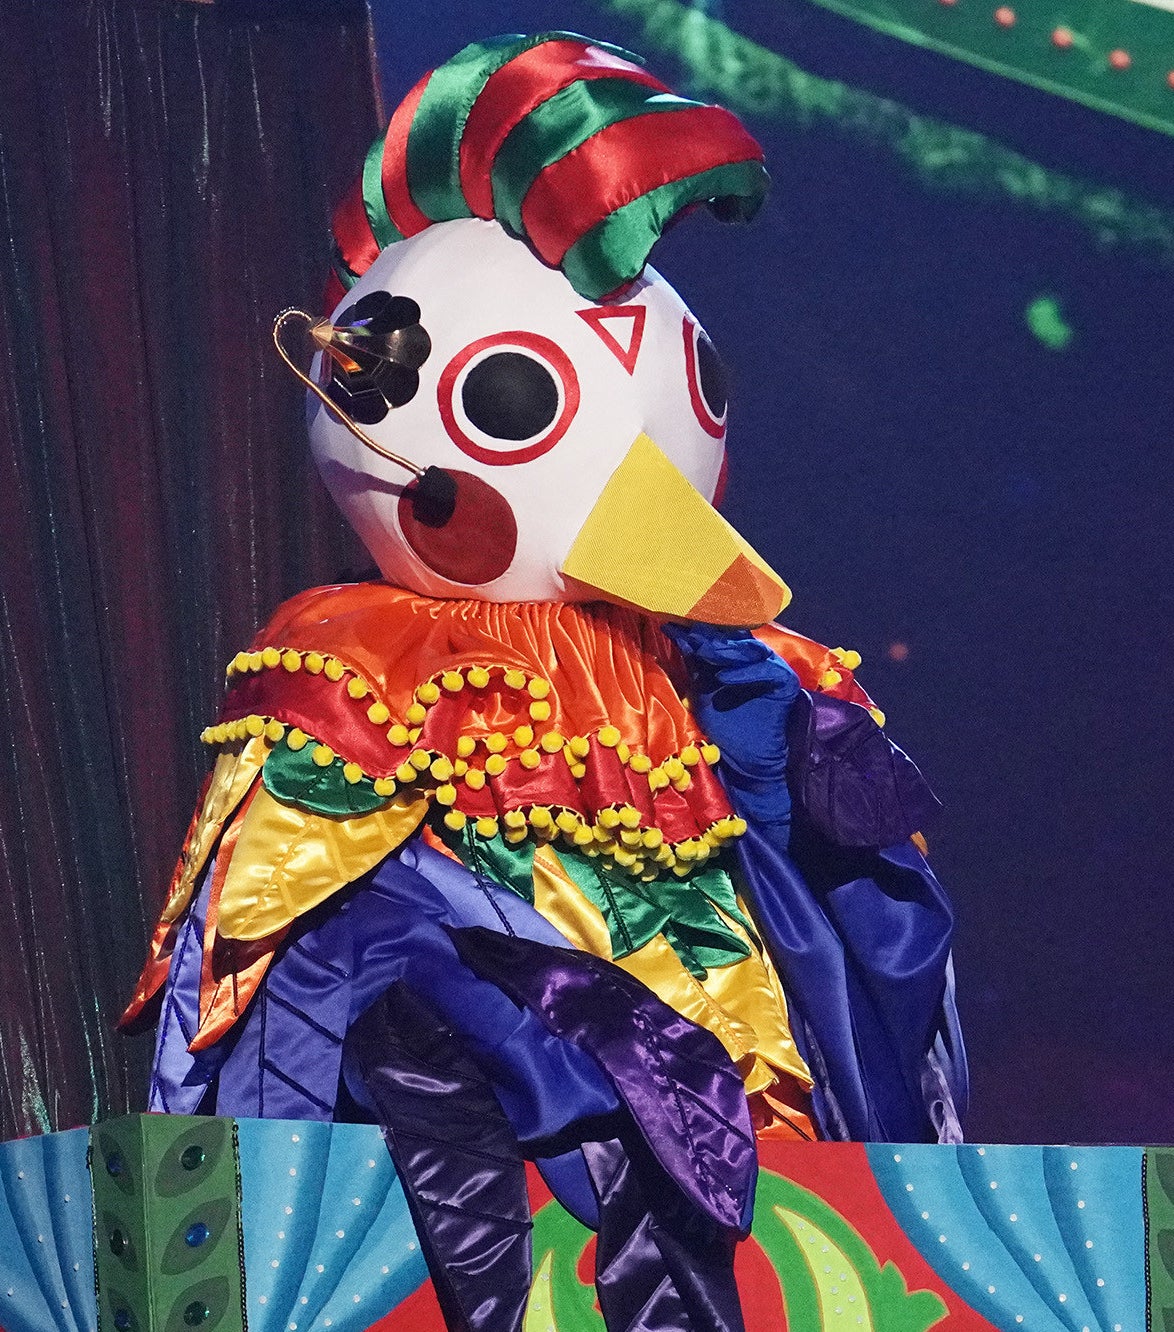 A costume with a bird head and colorful body